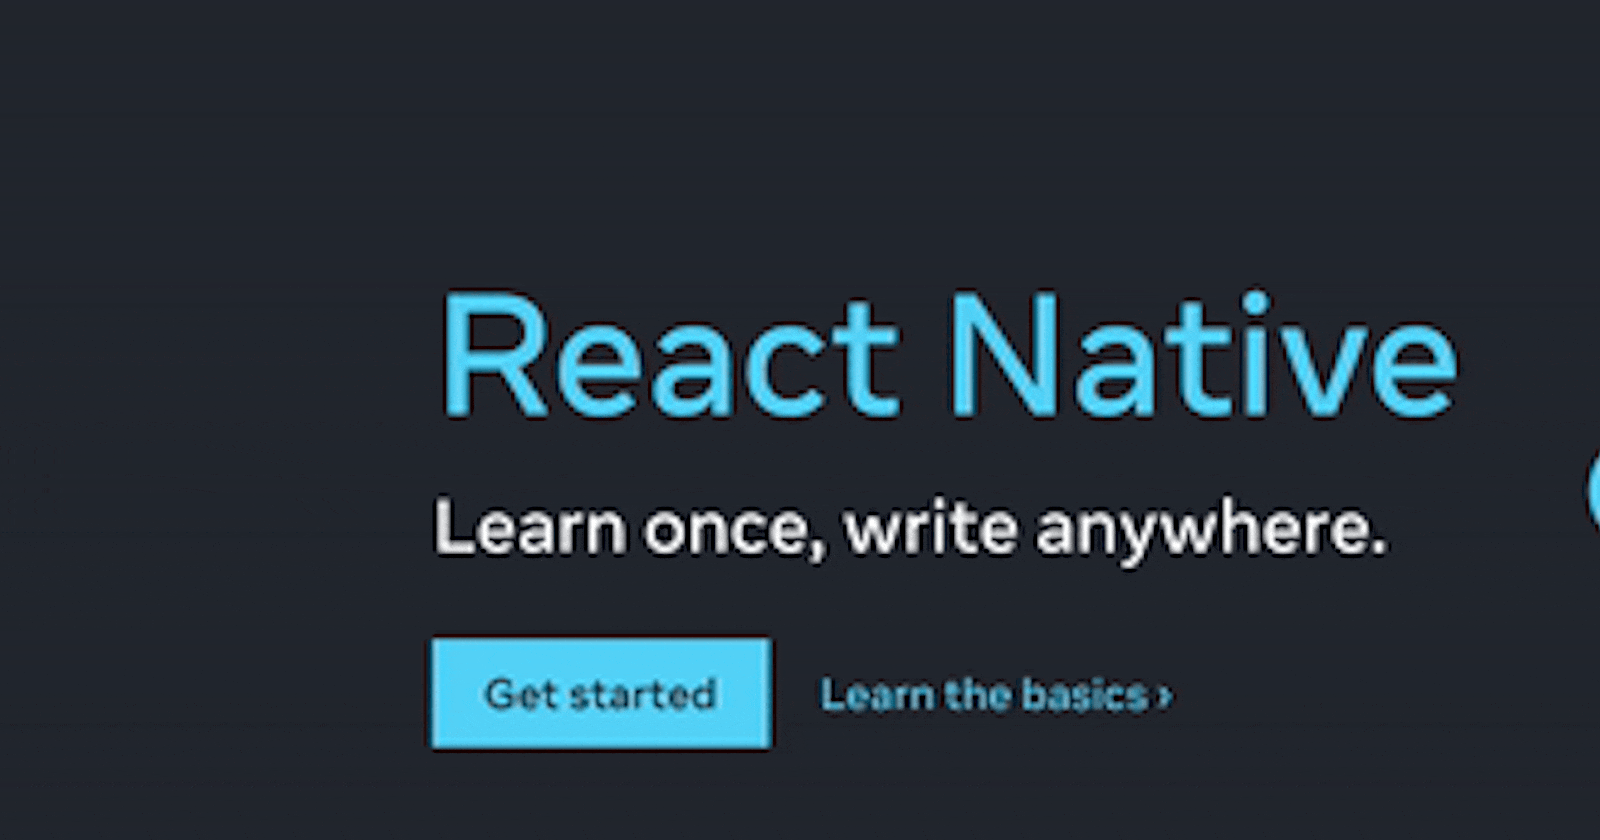 What you need to know about React Native